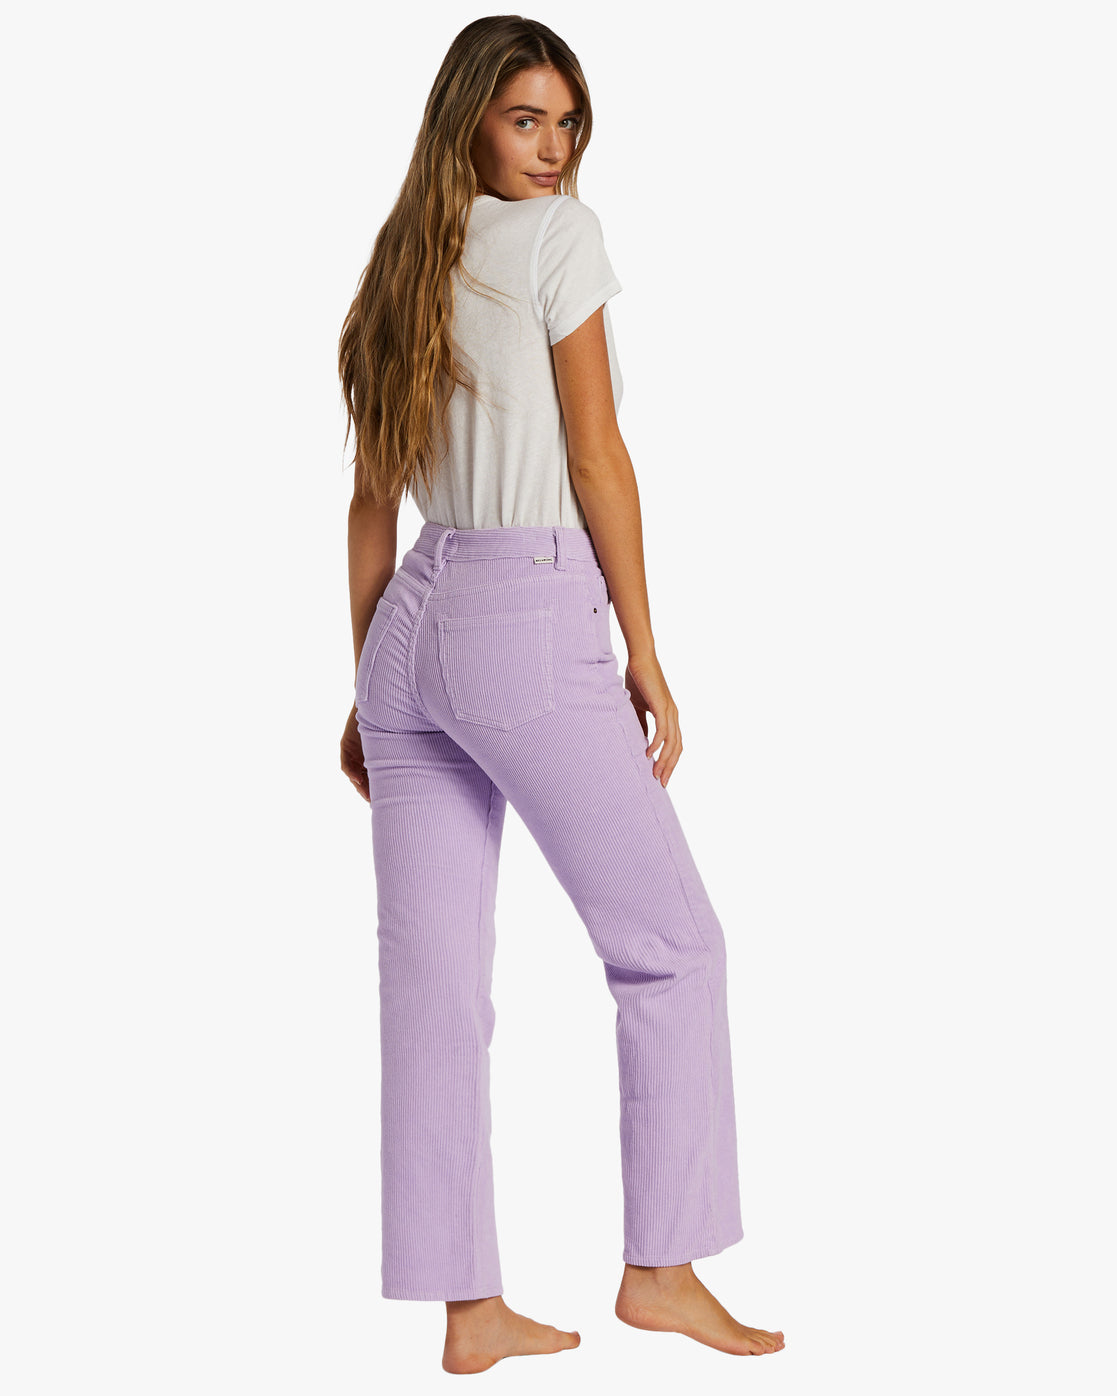 New Age Corduroy Trousers